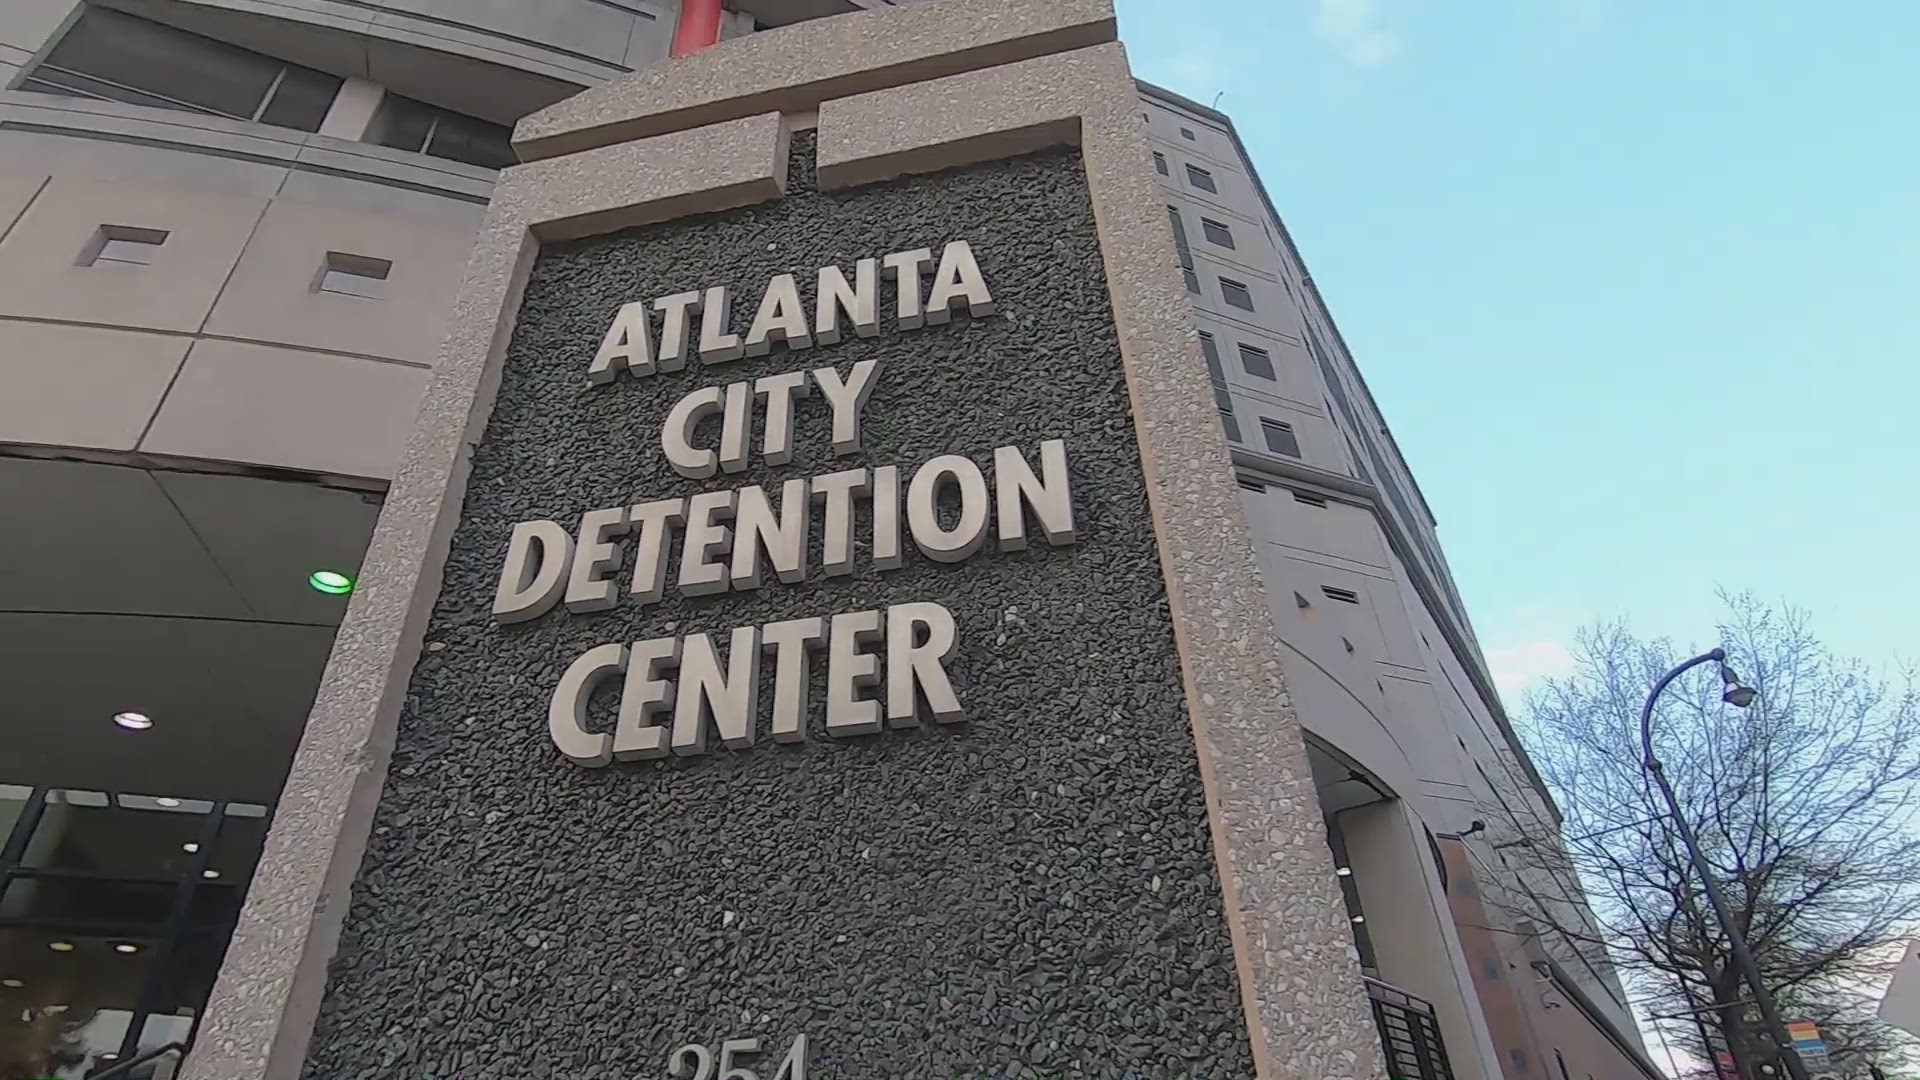 It's been a year since the City of Atlanta implemented signature bond for almost every non-violent misdemeanor offense. Our 11Alive Reveal investigation found that no one knows how bail reform is impacting the city.